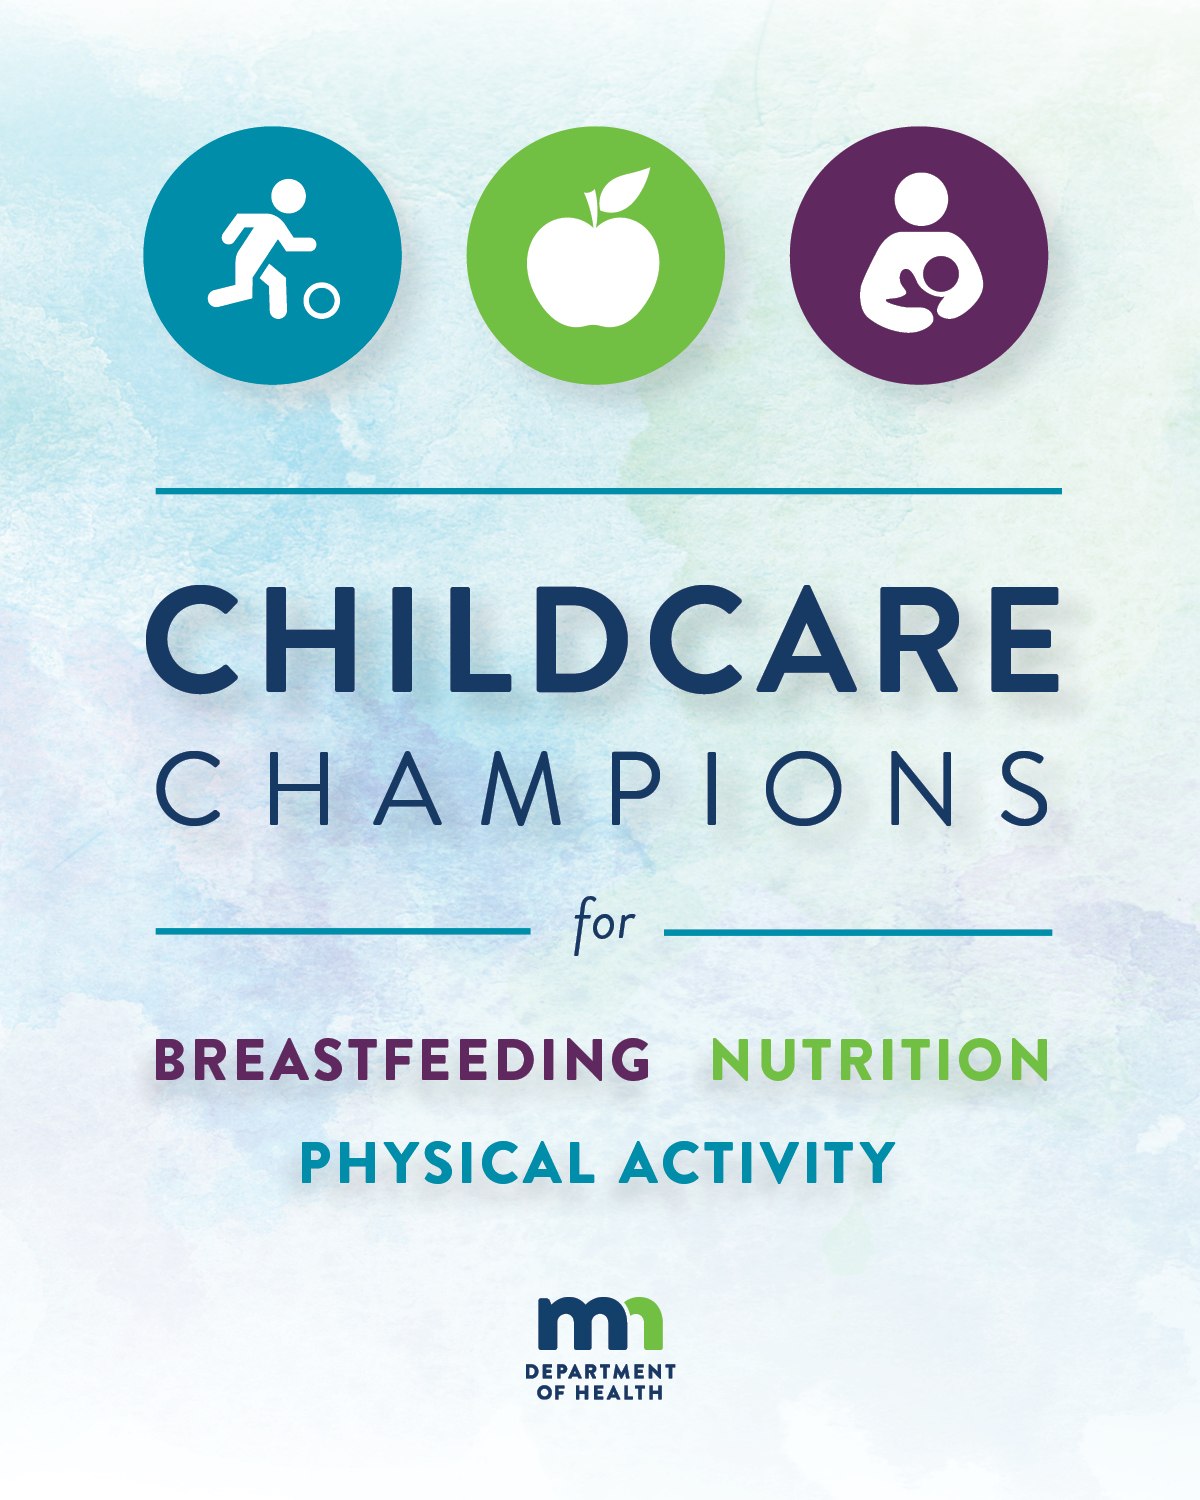 Childcare Champions for Breastfeeding, Nutrition, and Physical Activity